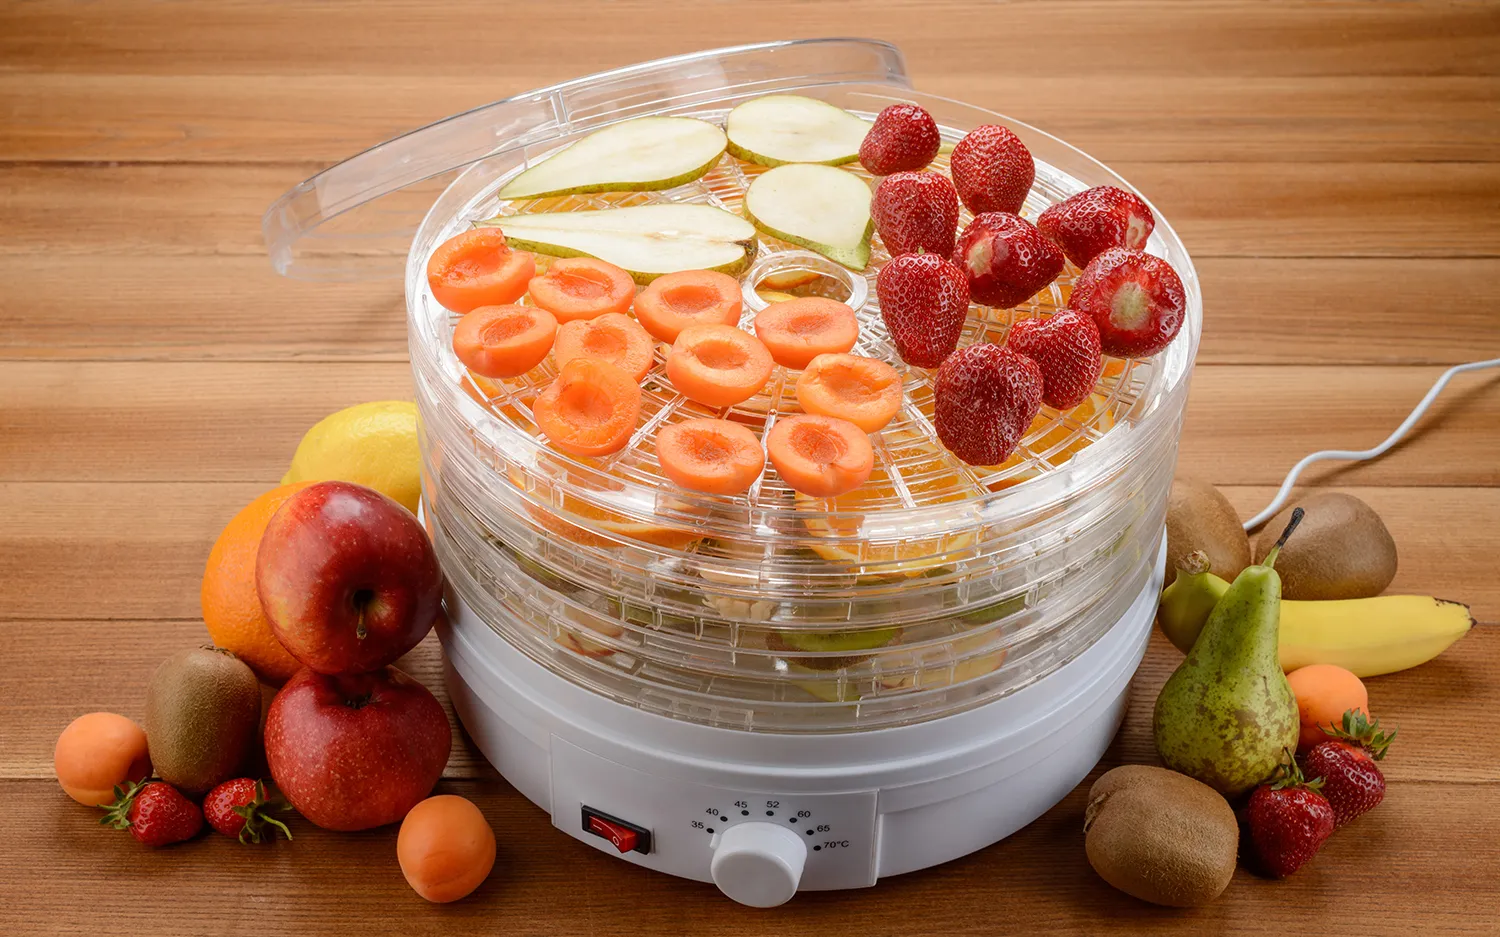 The Ultimate Vegetable Dehydrator Comparison Make an Informed Choice 2